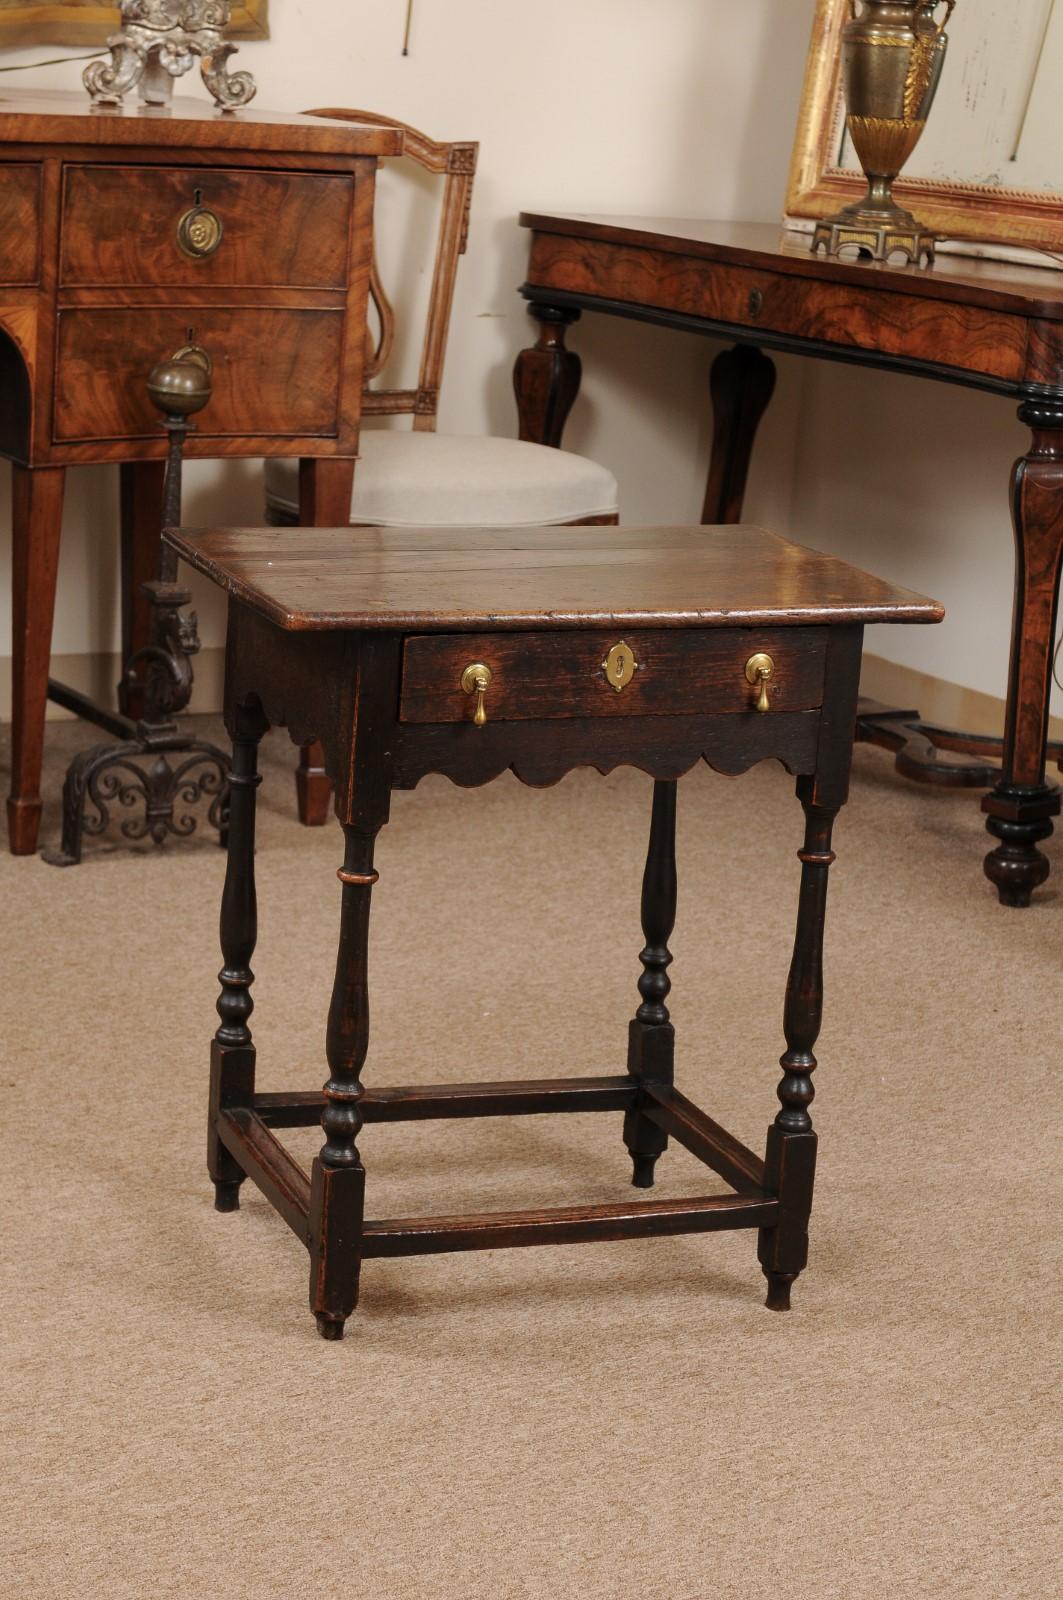 The English William & Mary style small oak side table with rectangular top, drawer with brass hardware and scalloped apron below. All resting on turned legs joined by box stretcher.